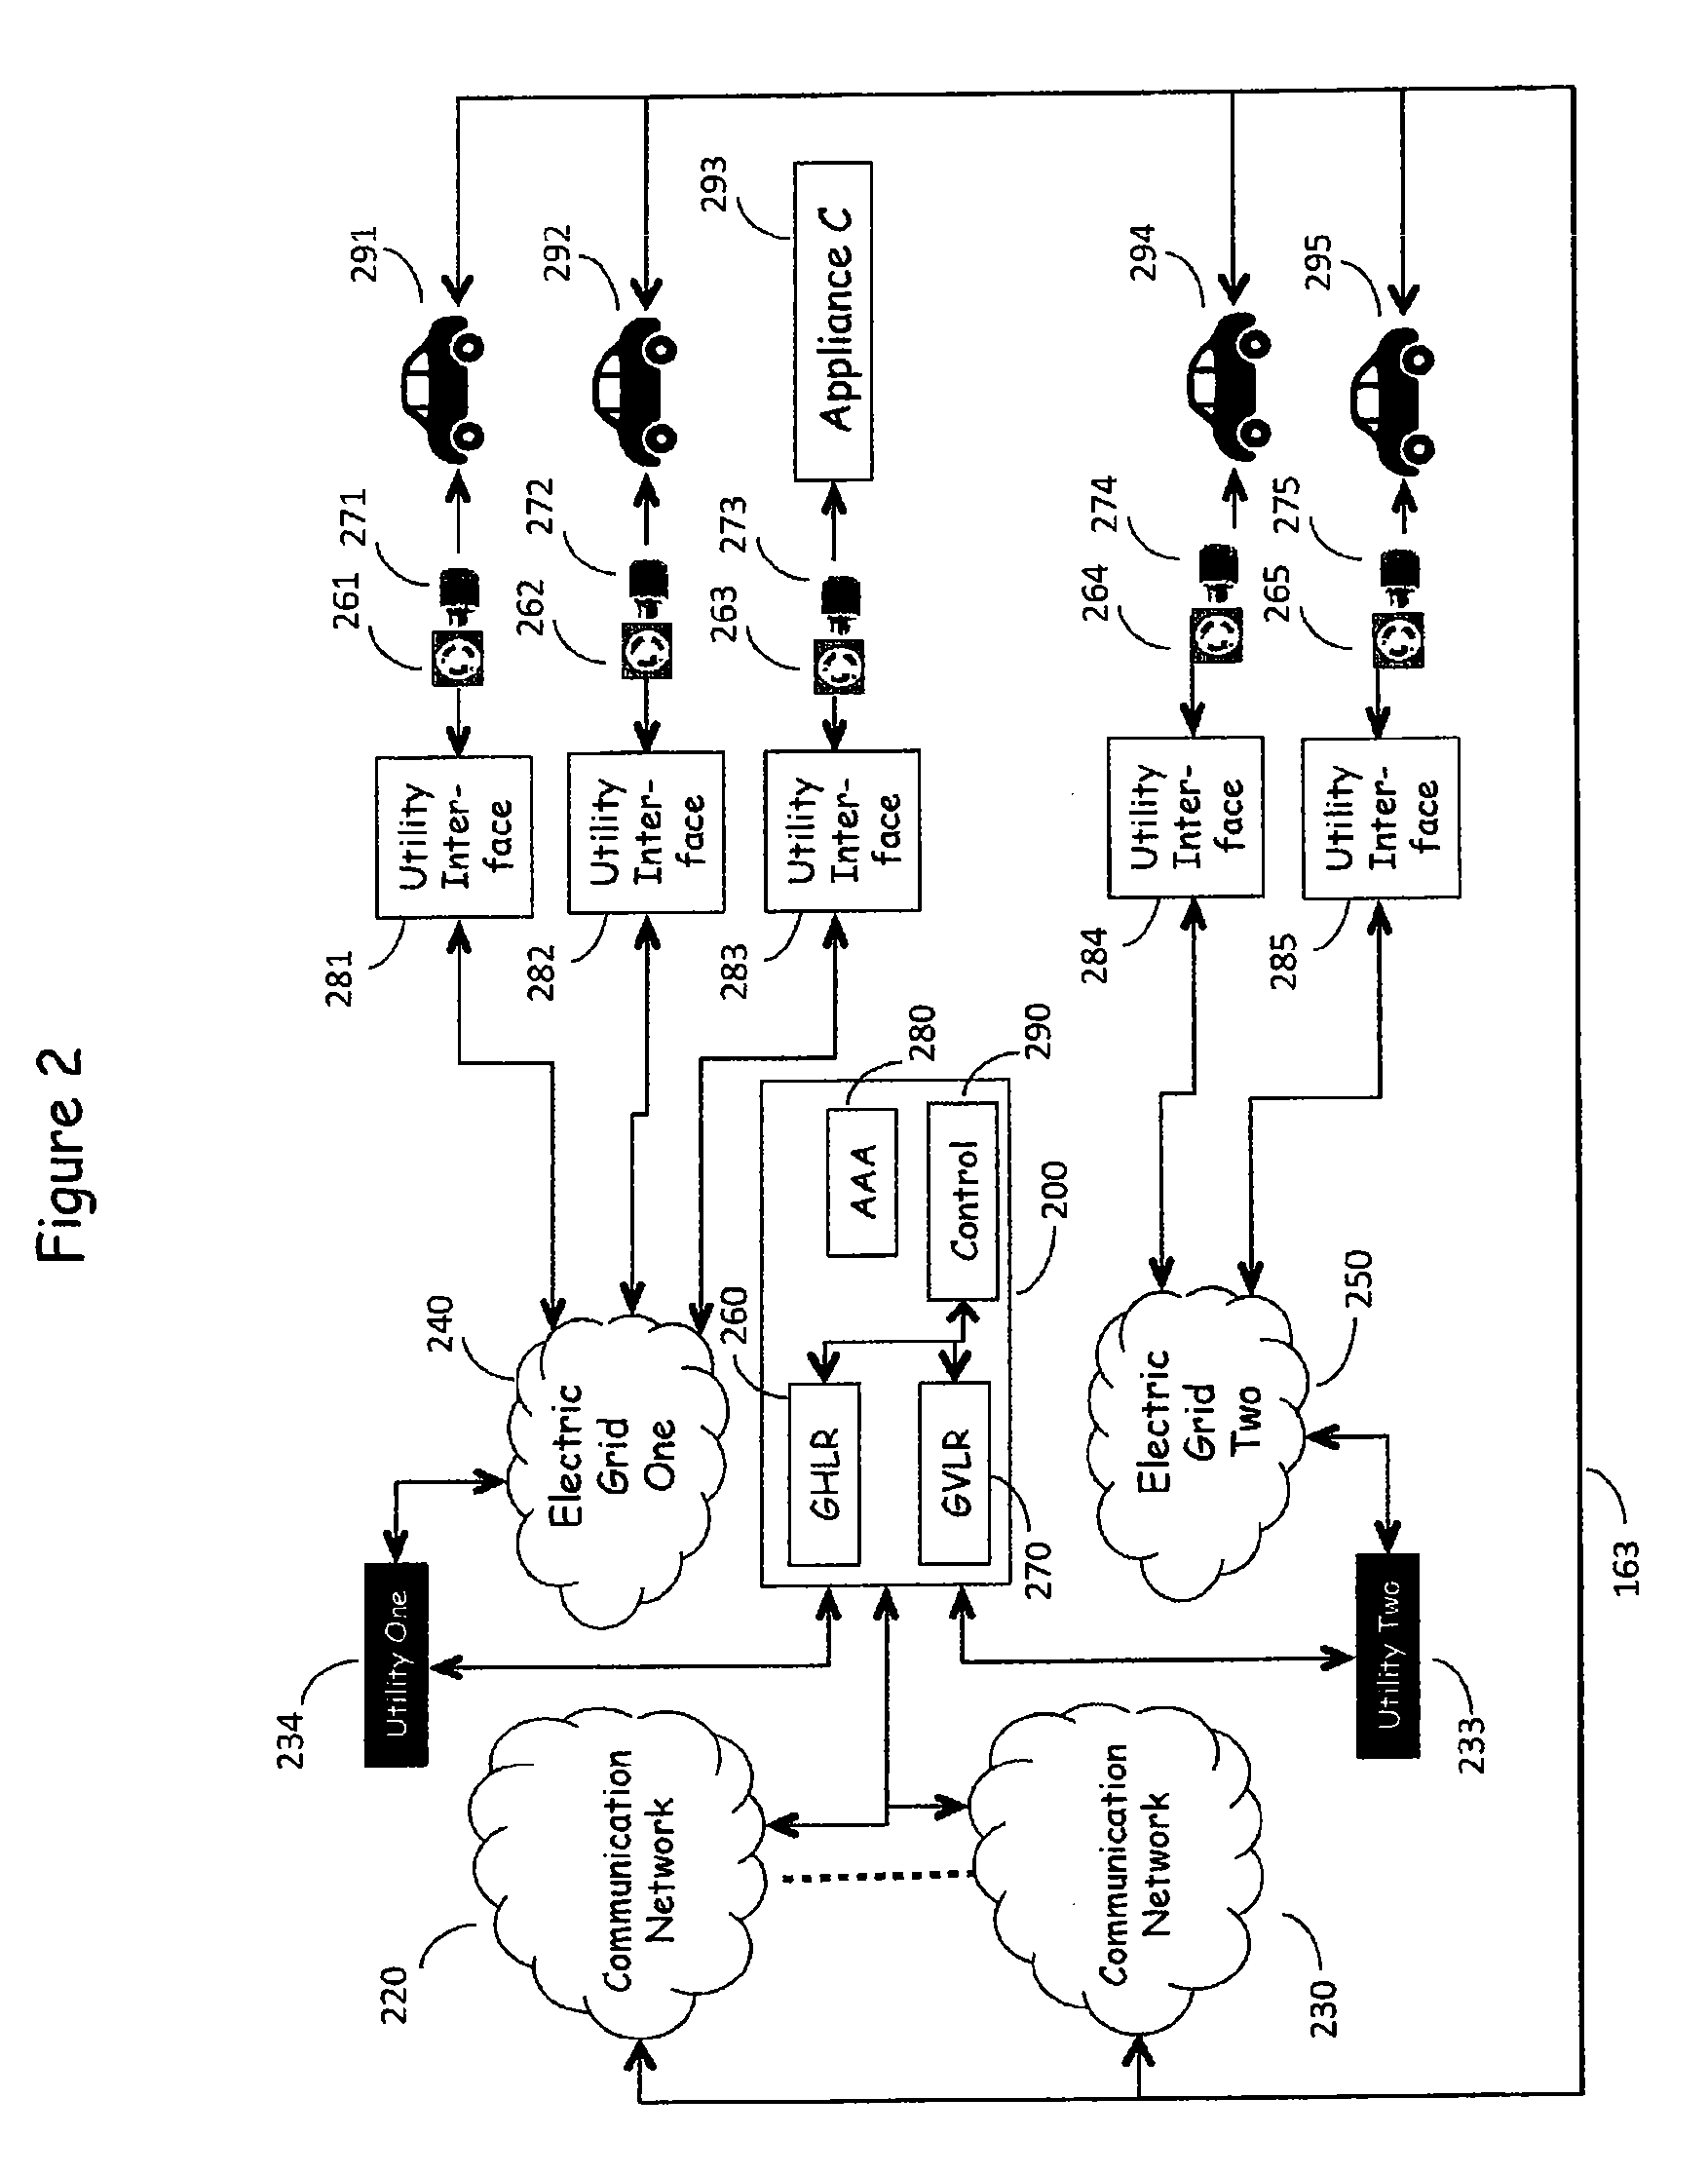 Sub-network load management for use in recharging vehicles equipped with electrically powered propulsion systems